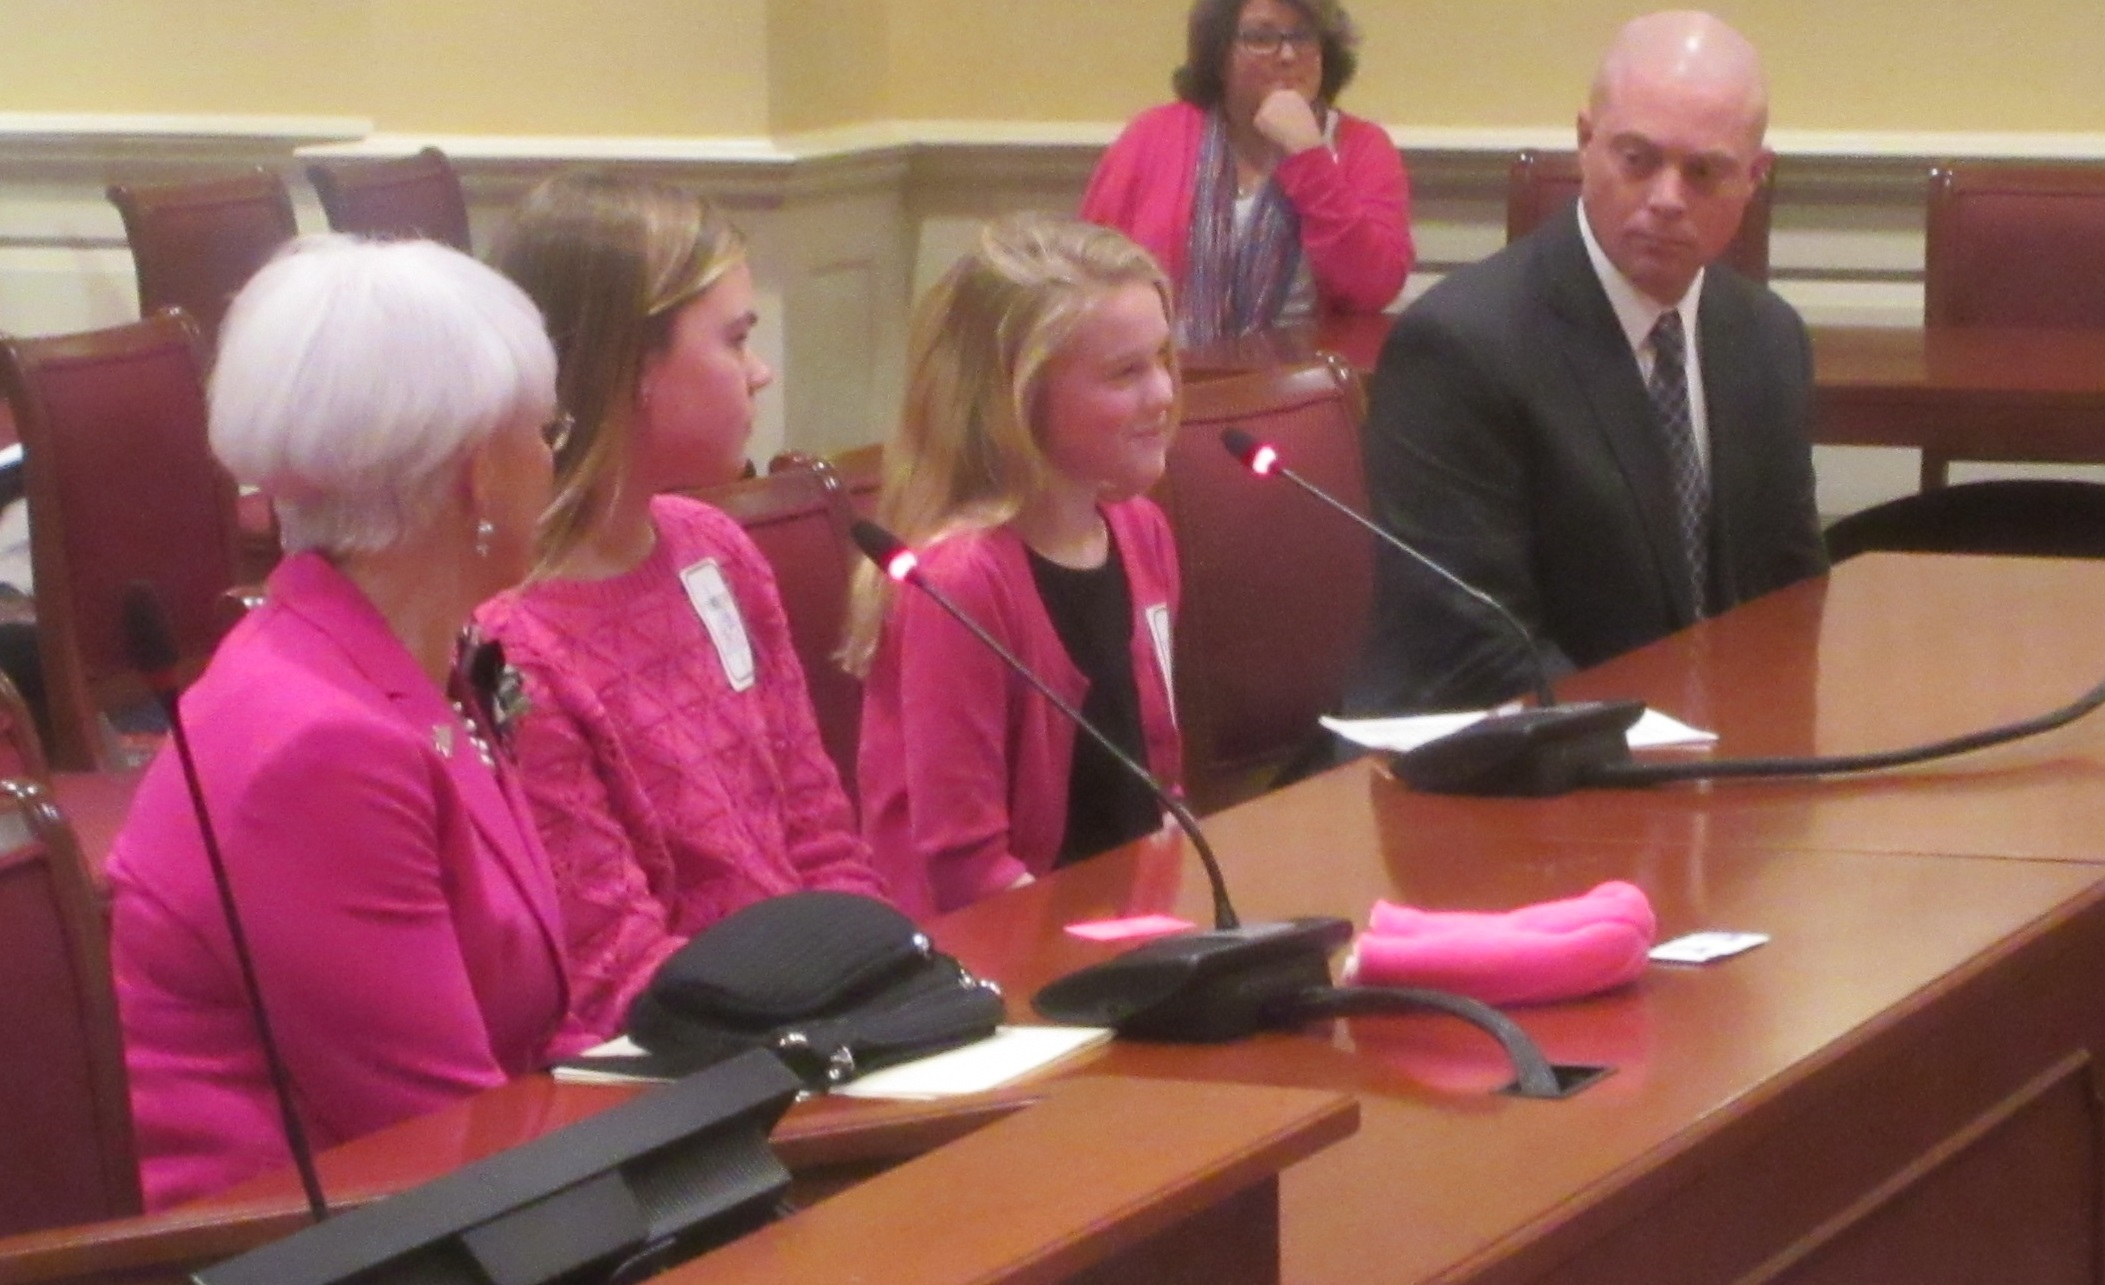 Pretty in pink hunters approved, Senate approves tax relief